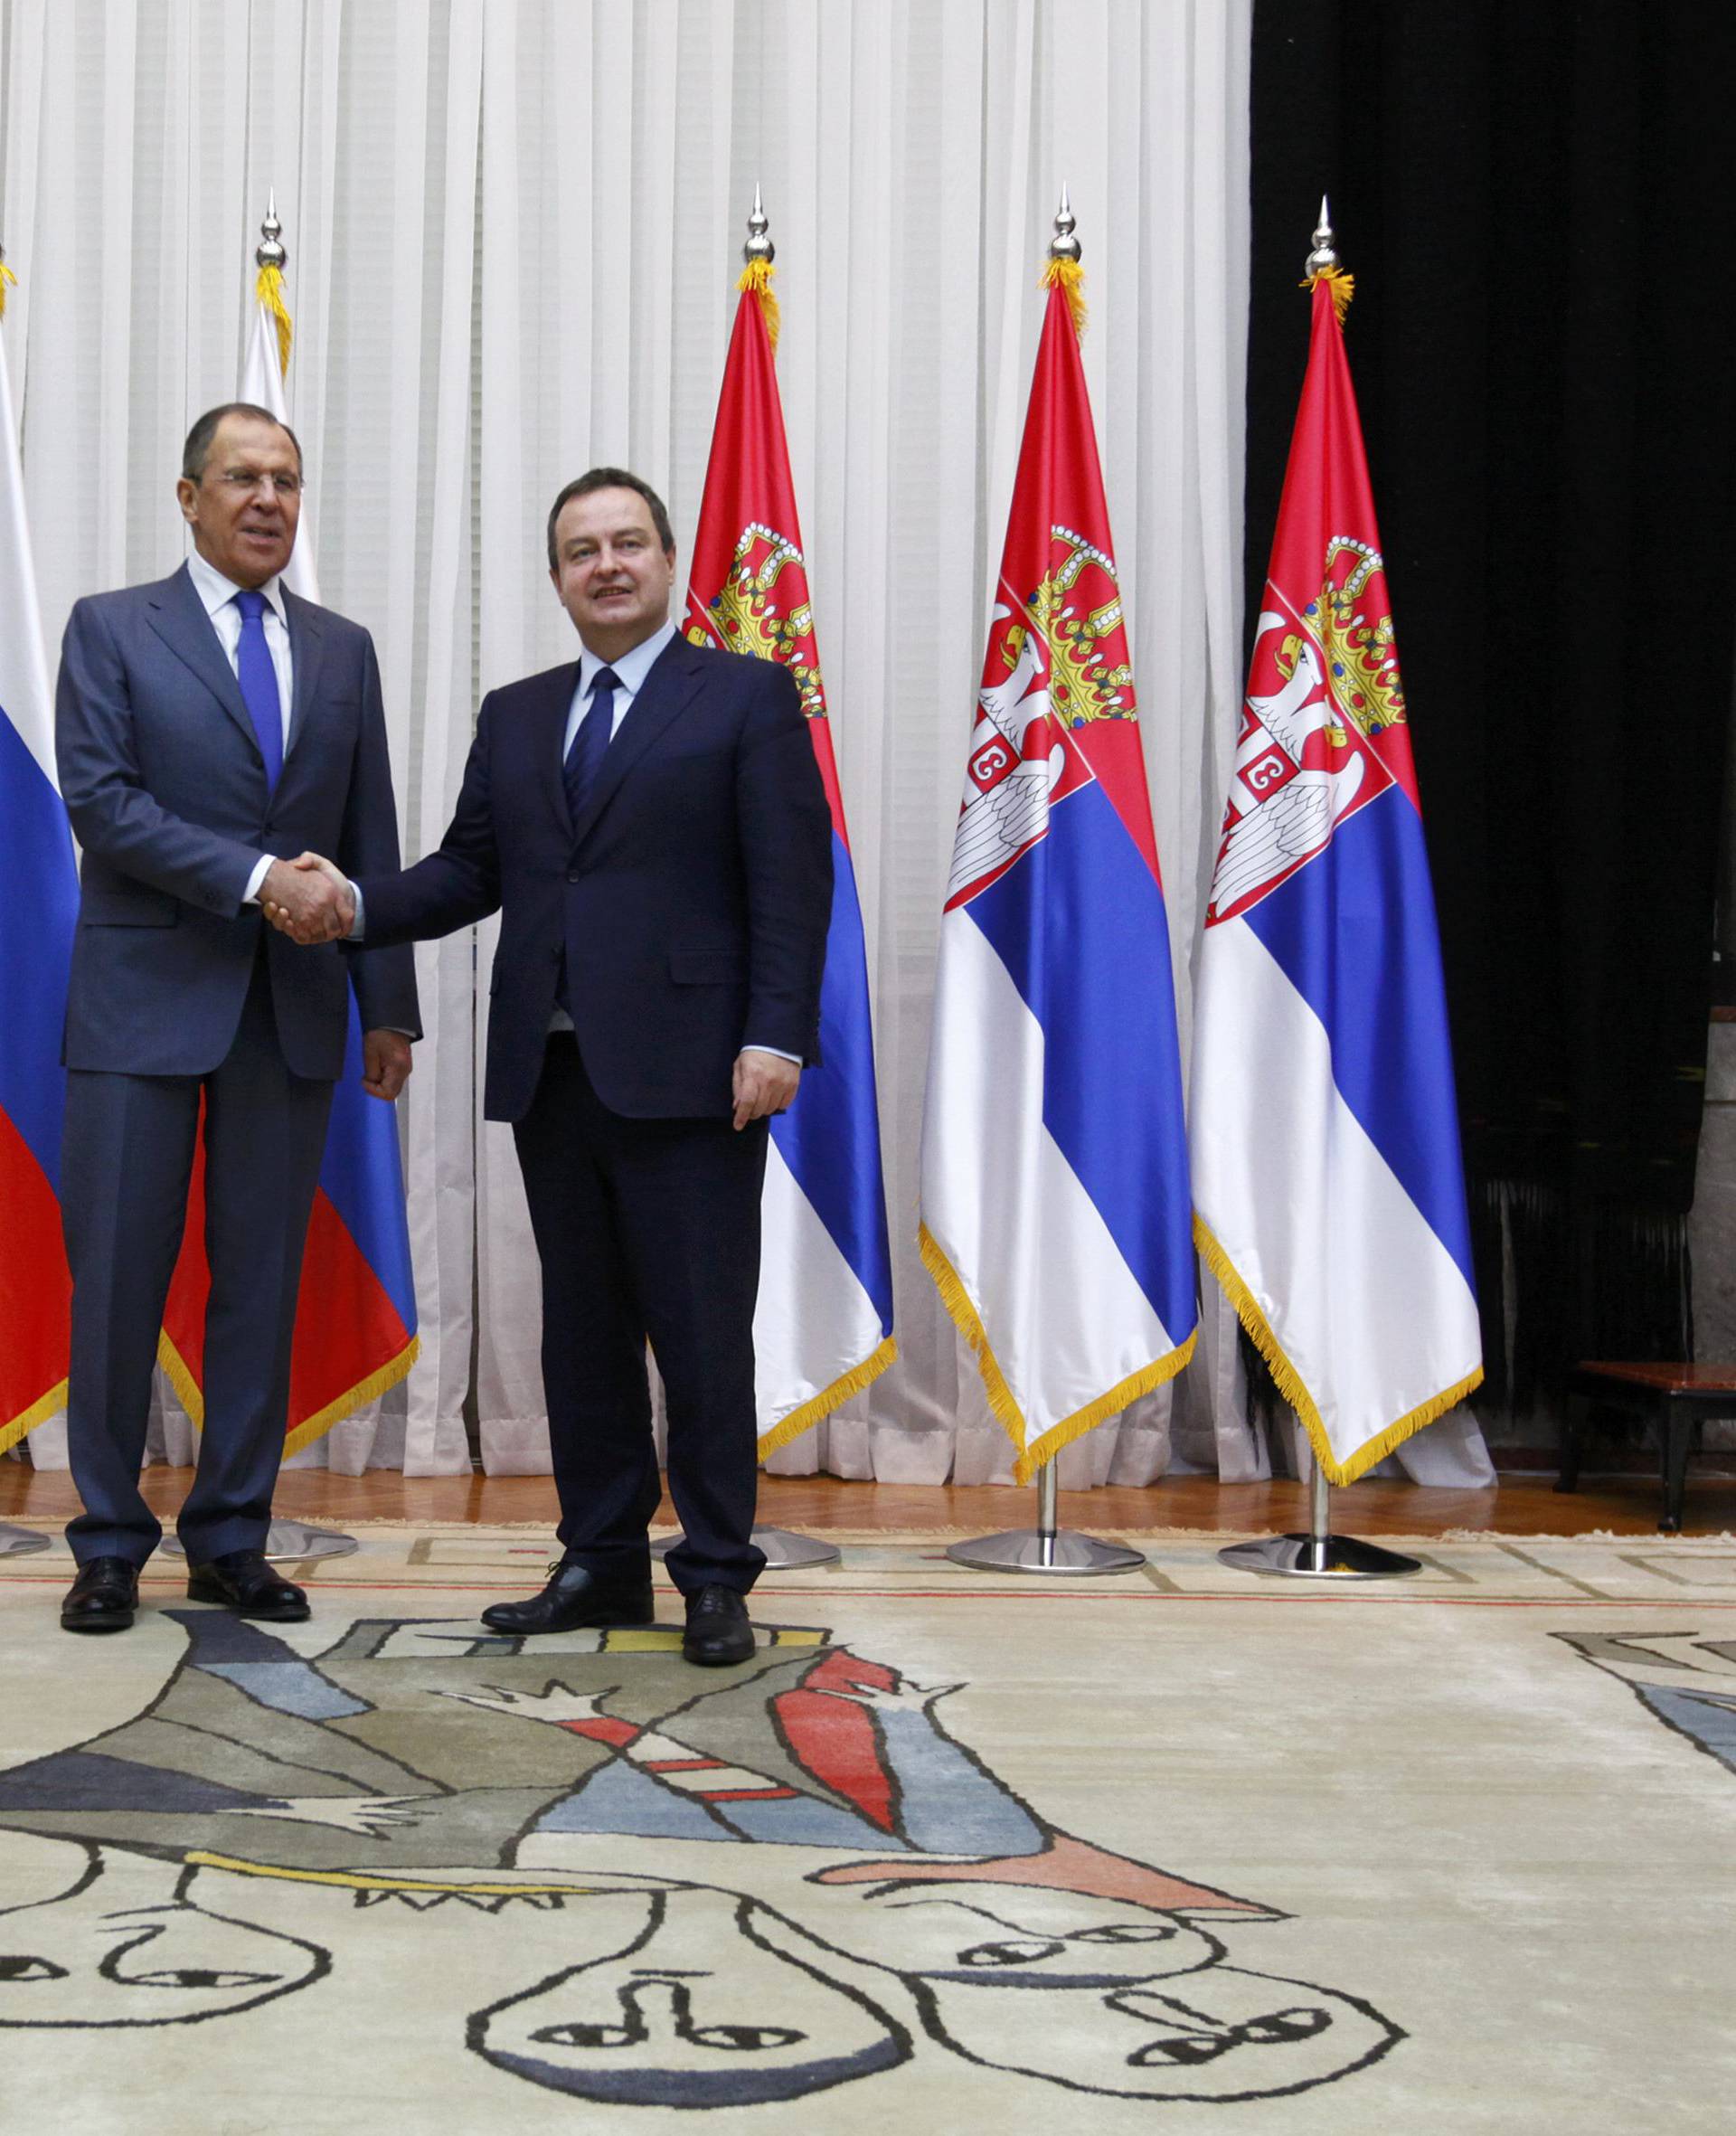 Serbian Foreign Minister Dacic welcomes his Russian counterpart Lavrov in Belgrade